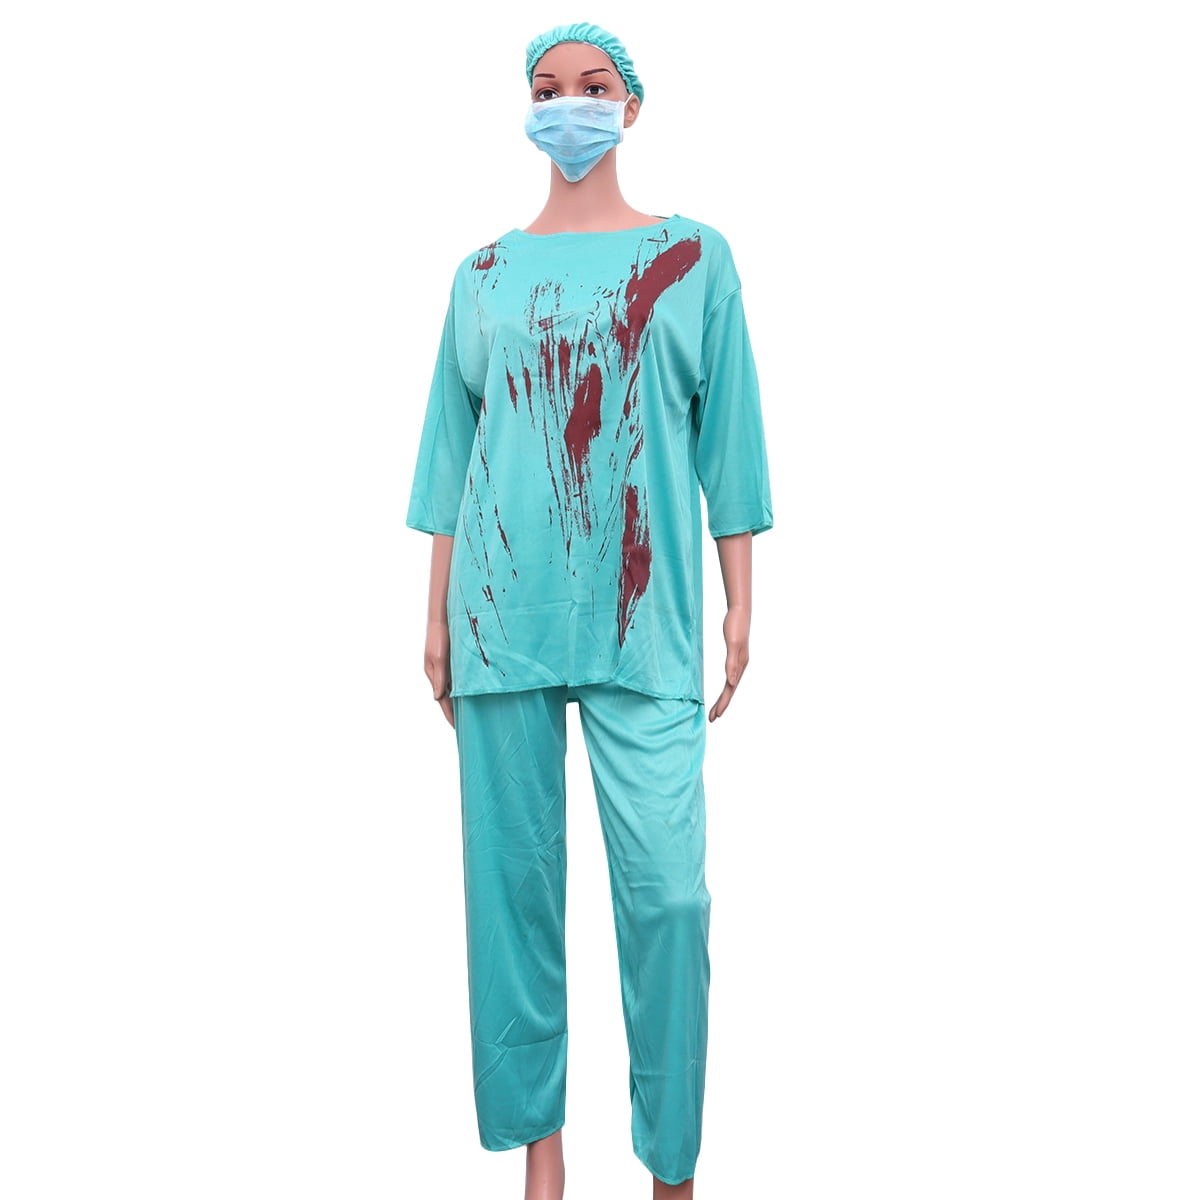 1PC Halloween Adult Performance Props Blood Doctor Plays Costume  Halloween Cosplay Costume Outwear for Women Men